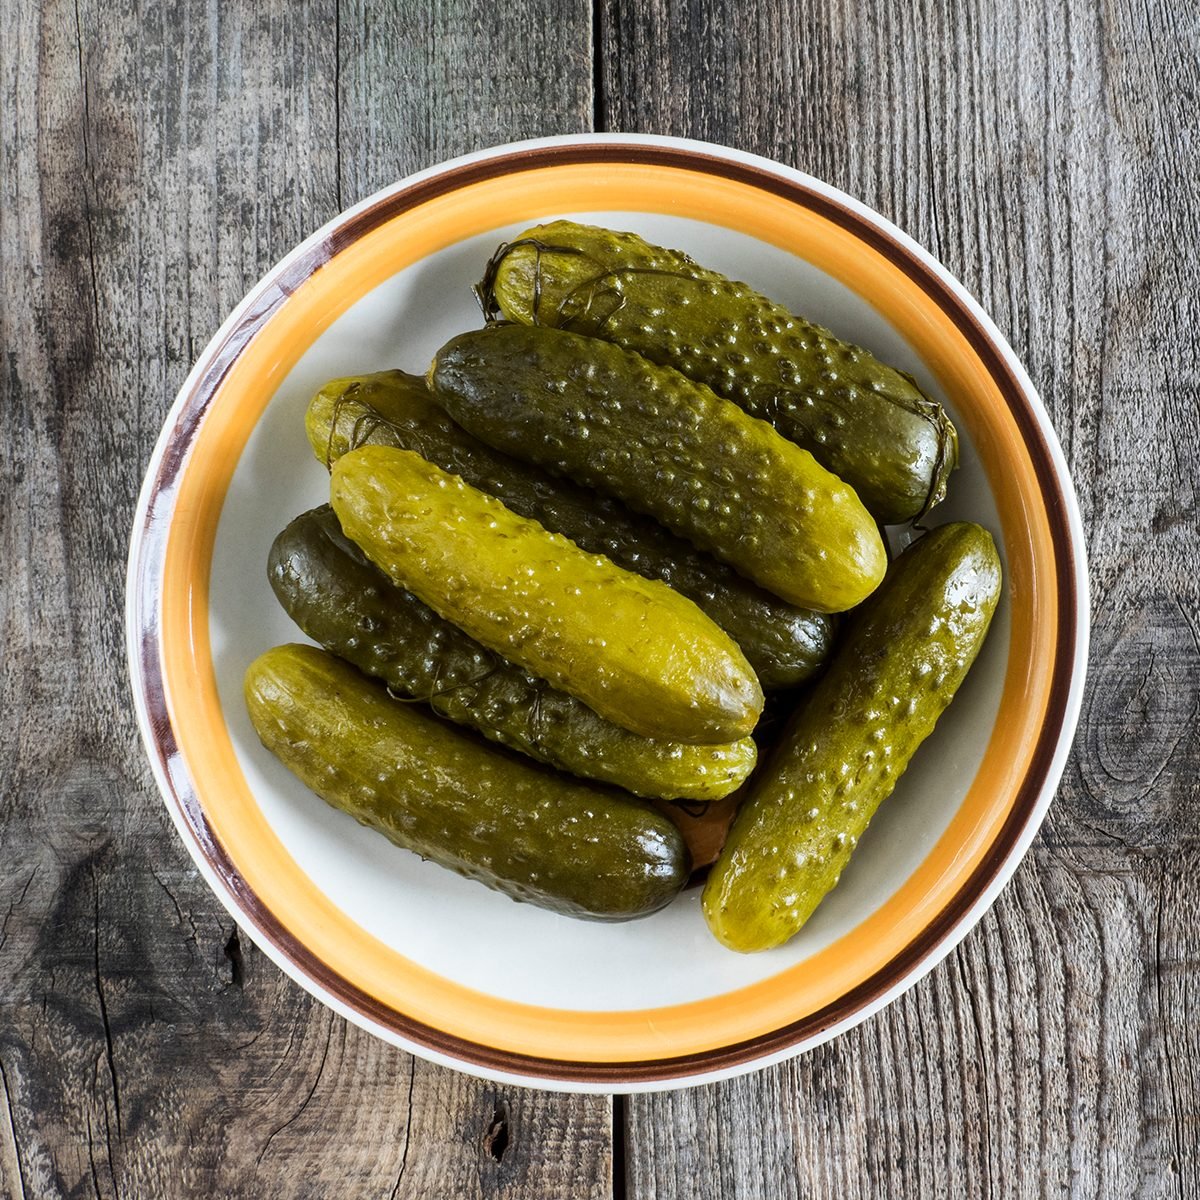 List 100+ Images types of pickles with pictures Superb